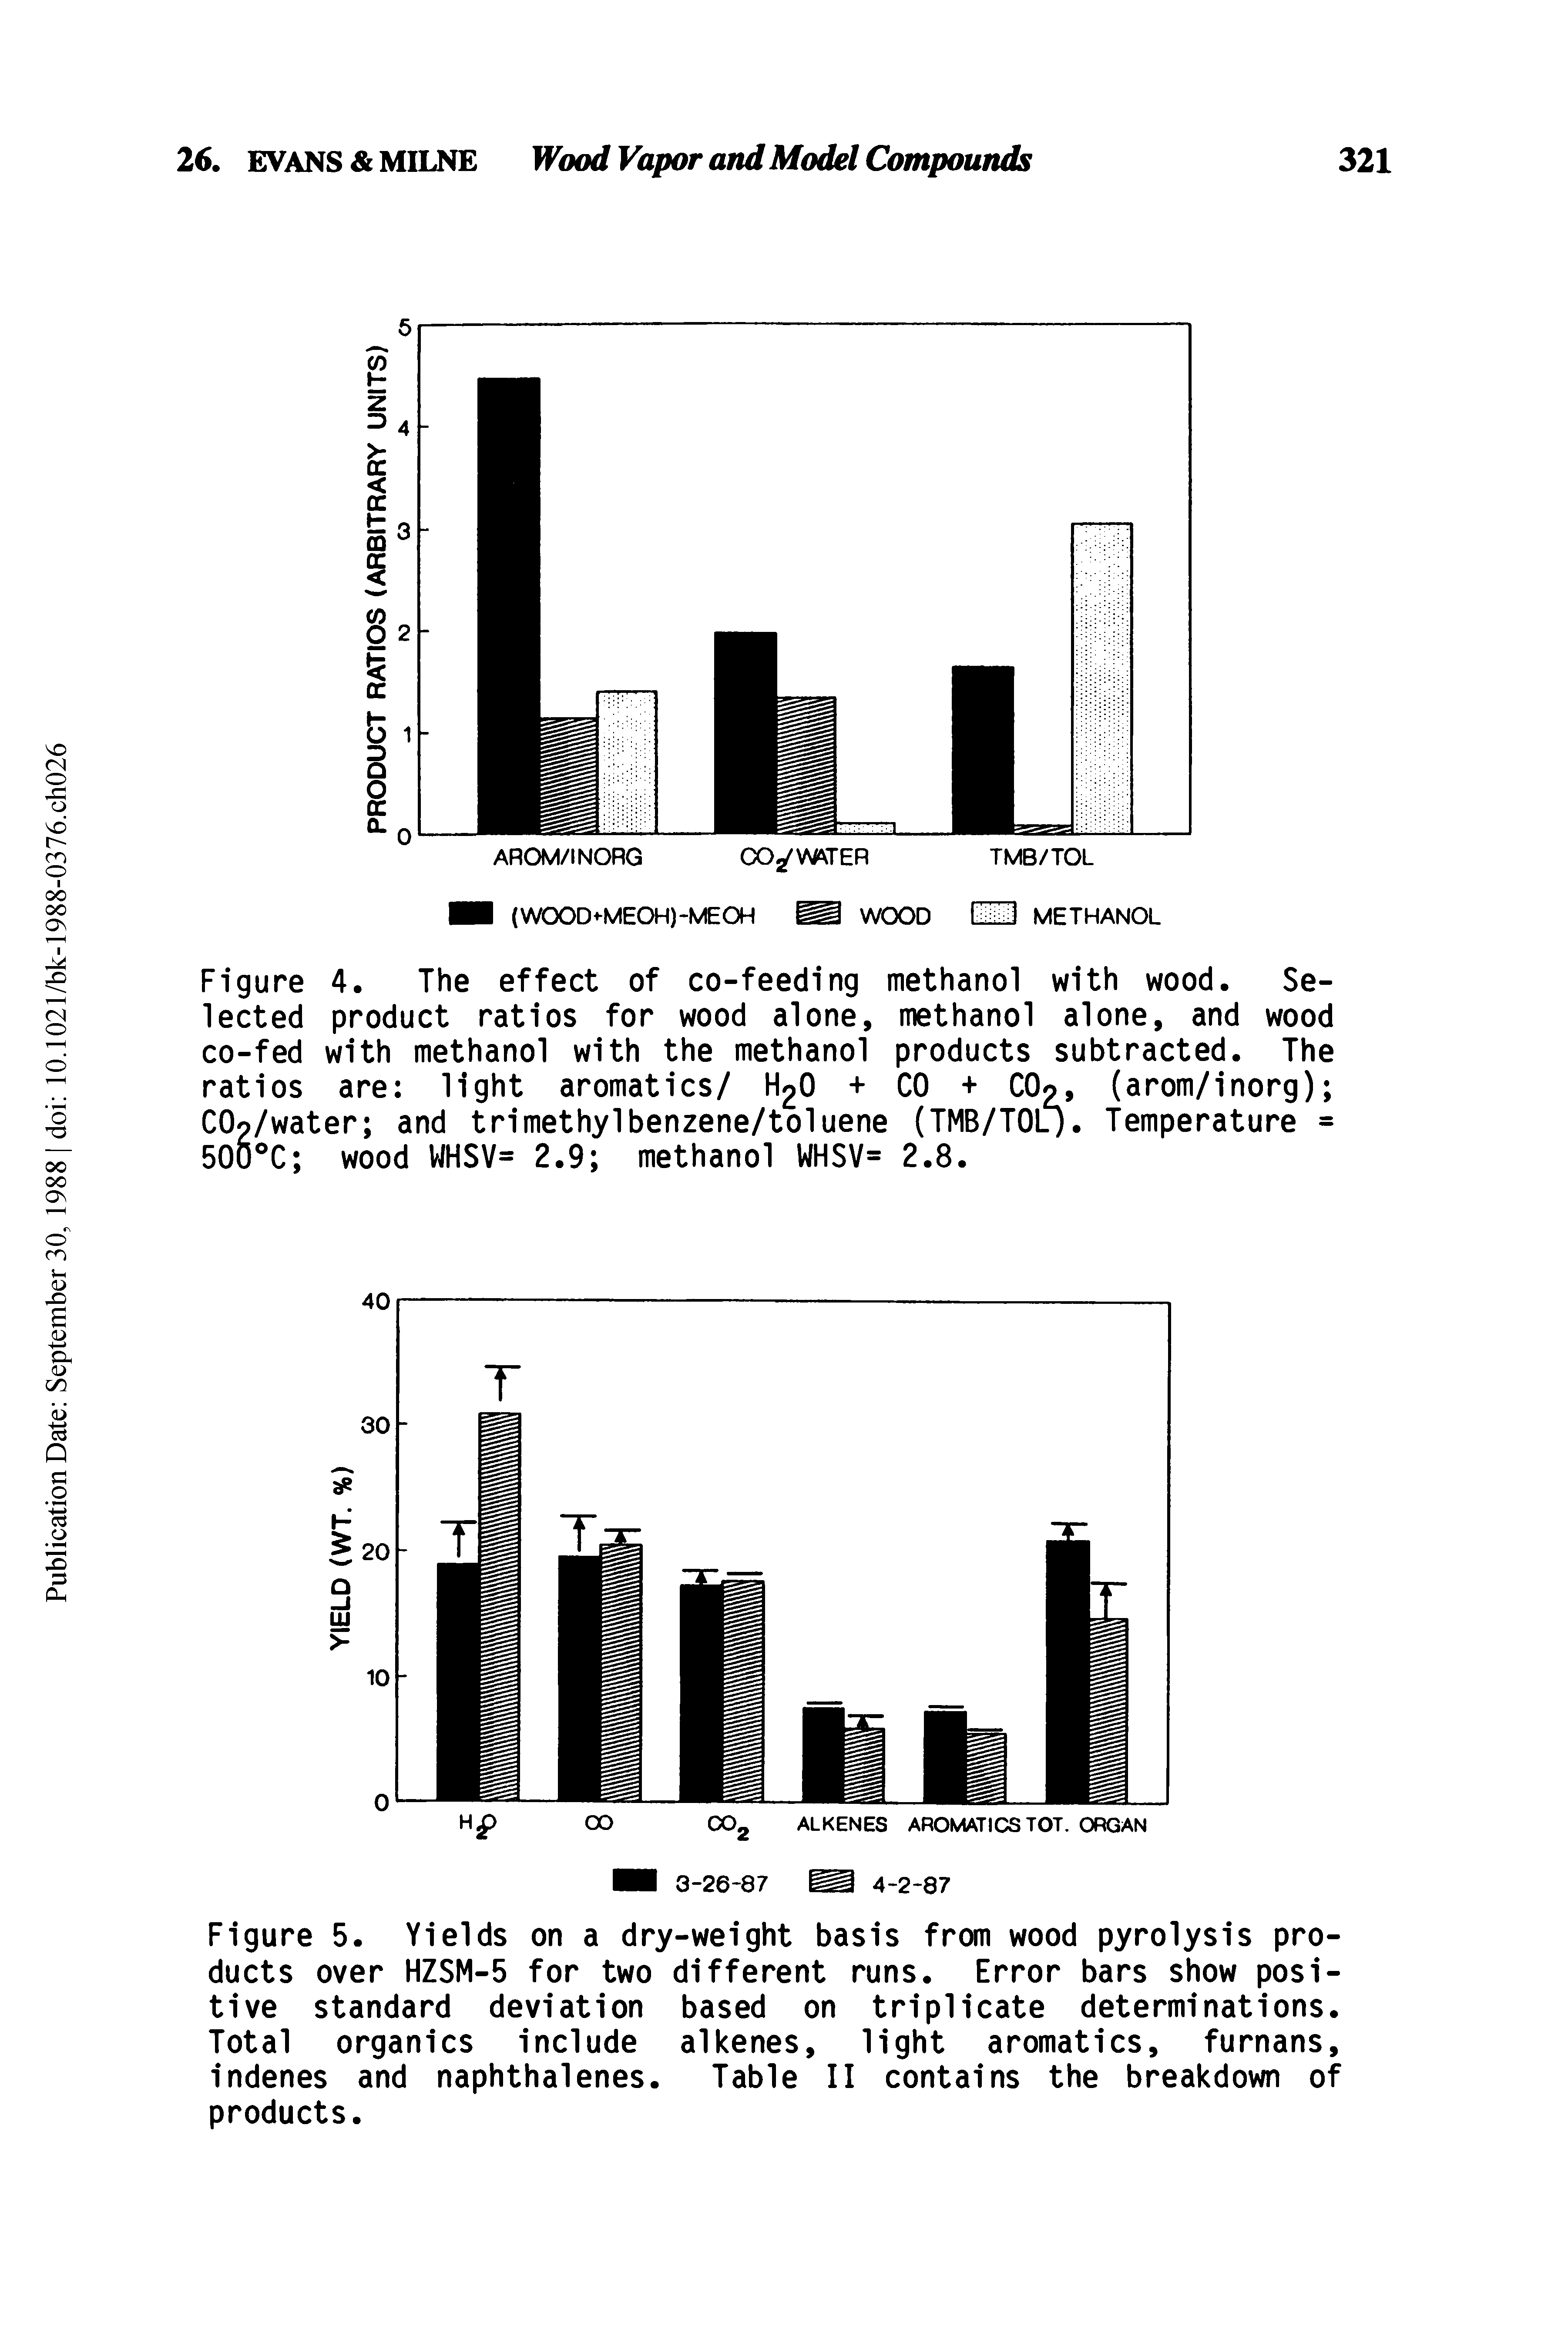 Figure 4. The effect of co-feeding methanol with wood. Selected product ratios for wood alone, methanol alone, and wood co-fed with methanol with the methanol products subtracted. The ratios are light aromatics/ H2O + CO + COo, (arom/inorg) COo/water and trimethylbenzene/toluene (TMB/TOO. Temperature = 500 C wood WHSV= 2.9 methanol WHSV= 2.8.